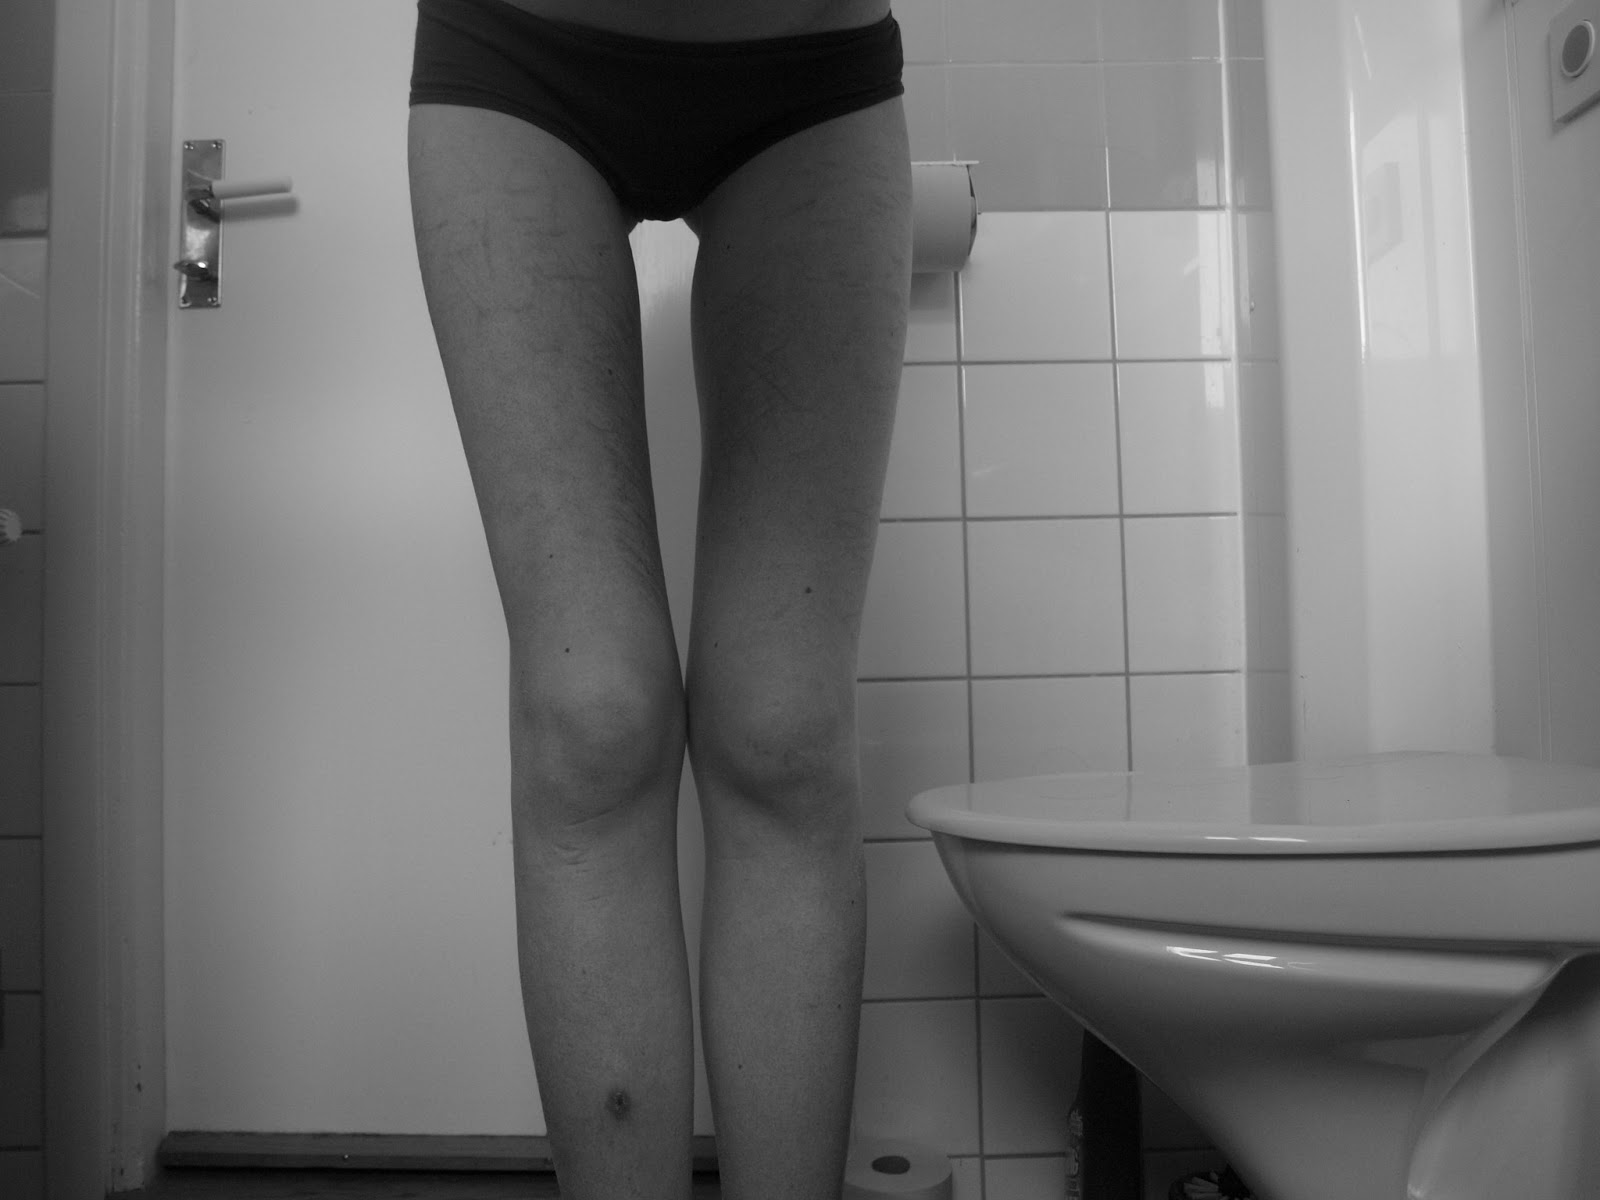 A Life Without Anorexia Love Your Legs